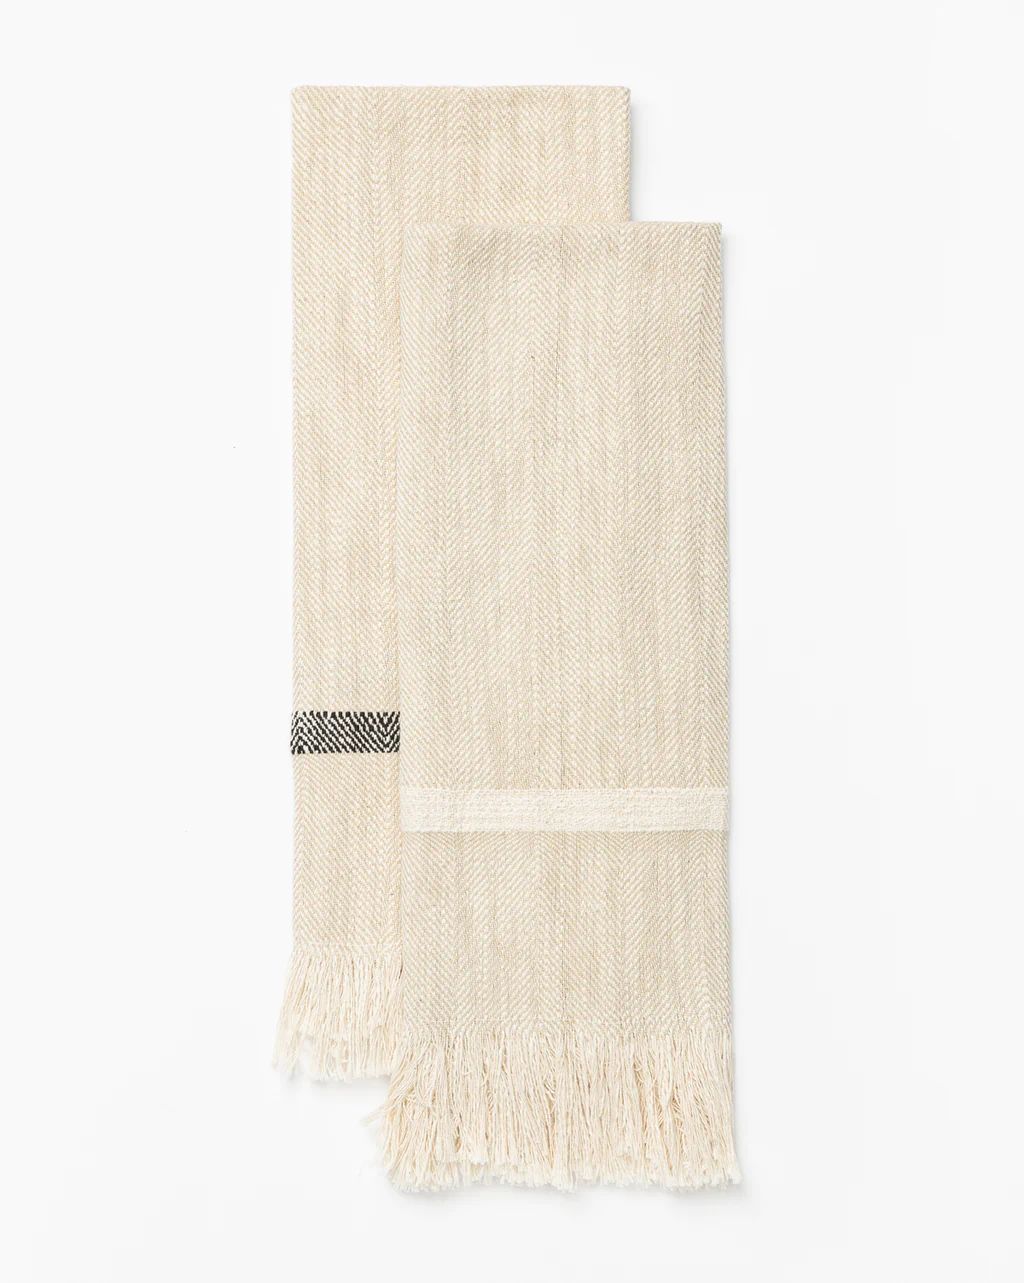 Fringed Striped Towel (Set of 2) | McGee & Co.